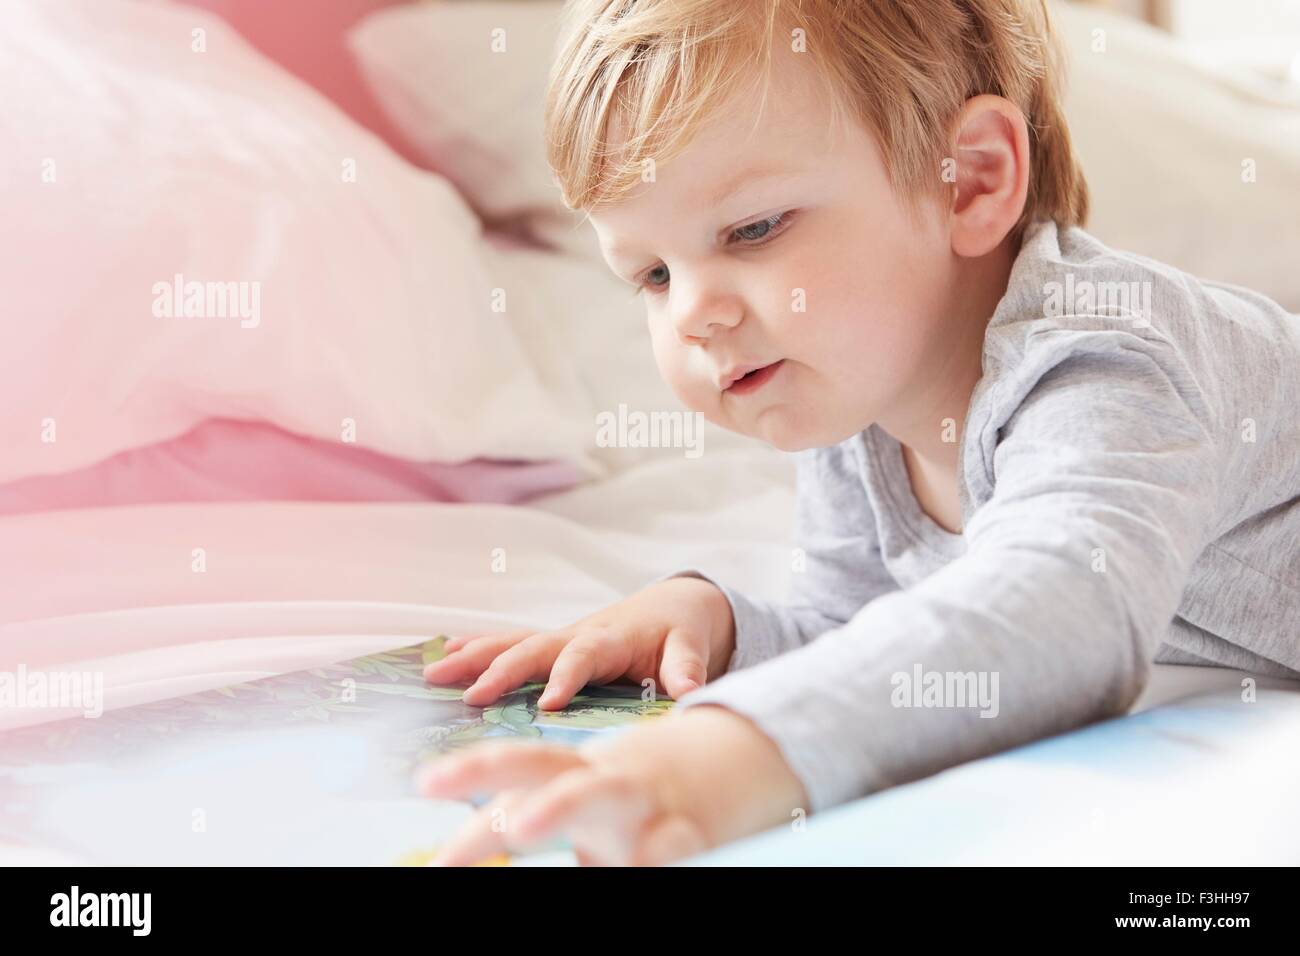 Head and shoulders of boy on bed lying on front looking at storybook Stock Photo